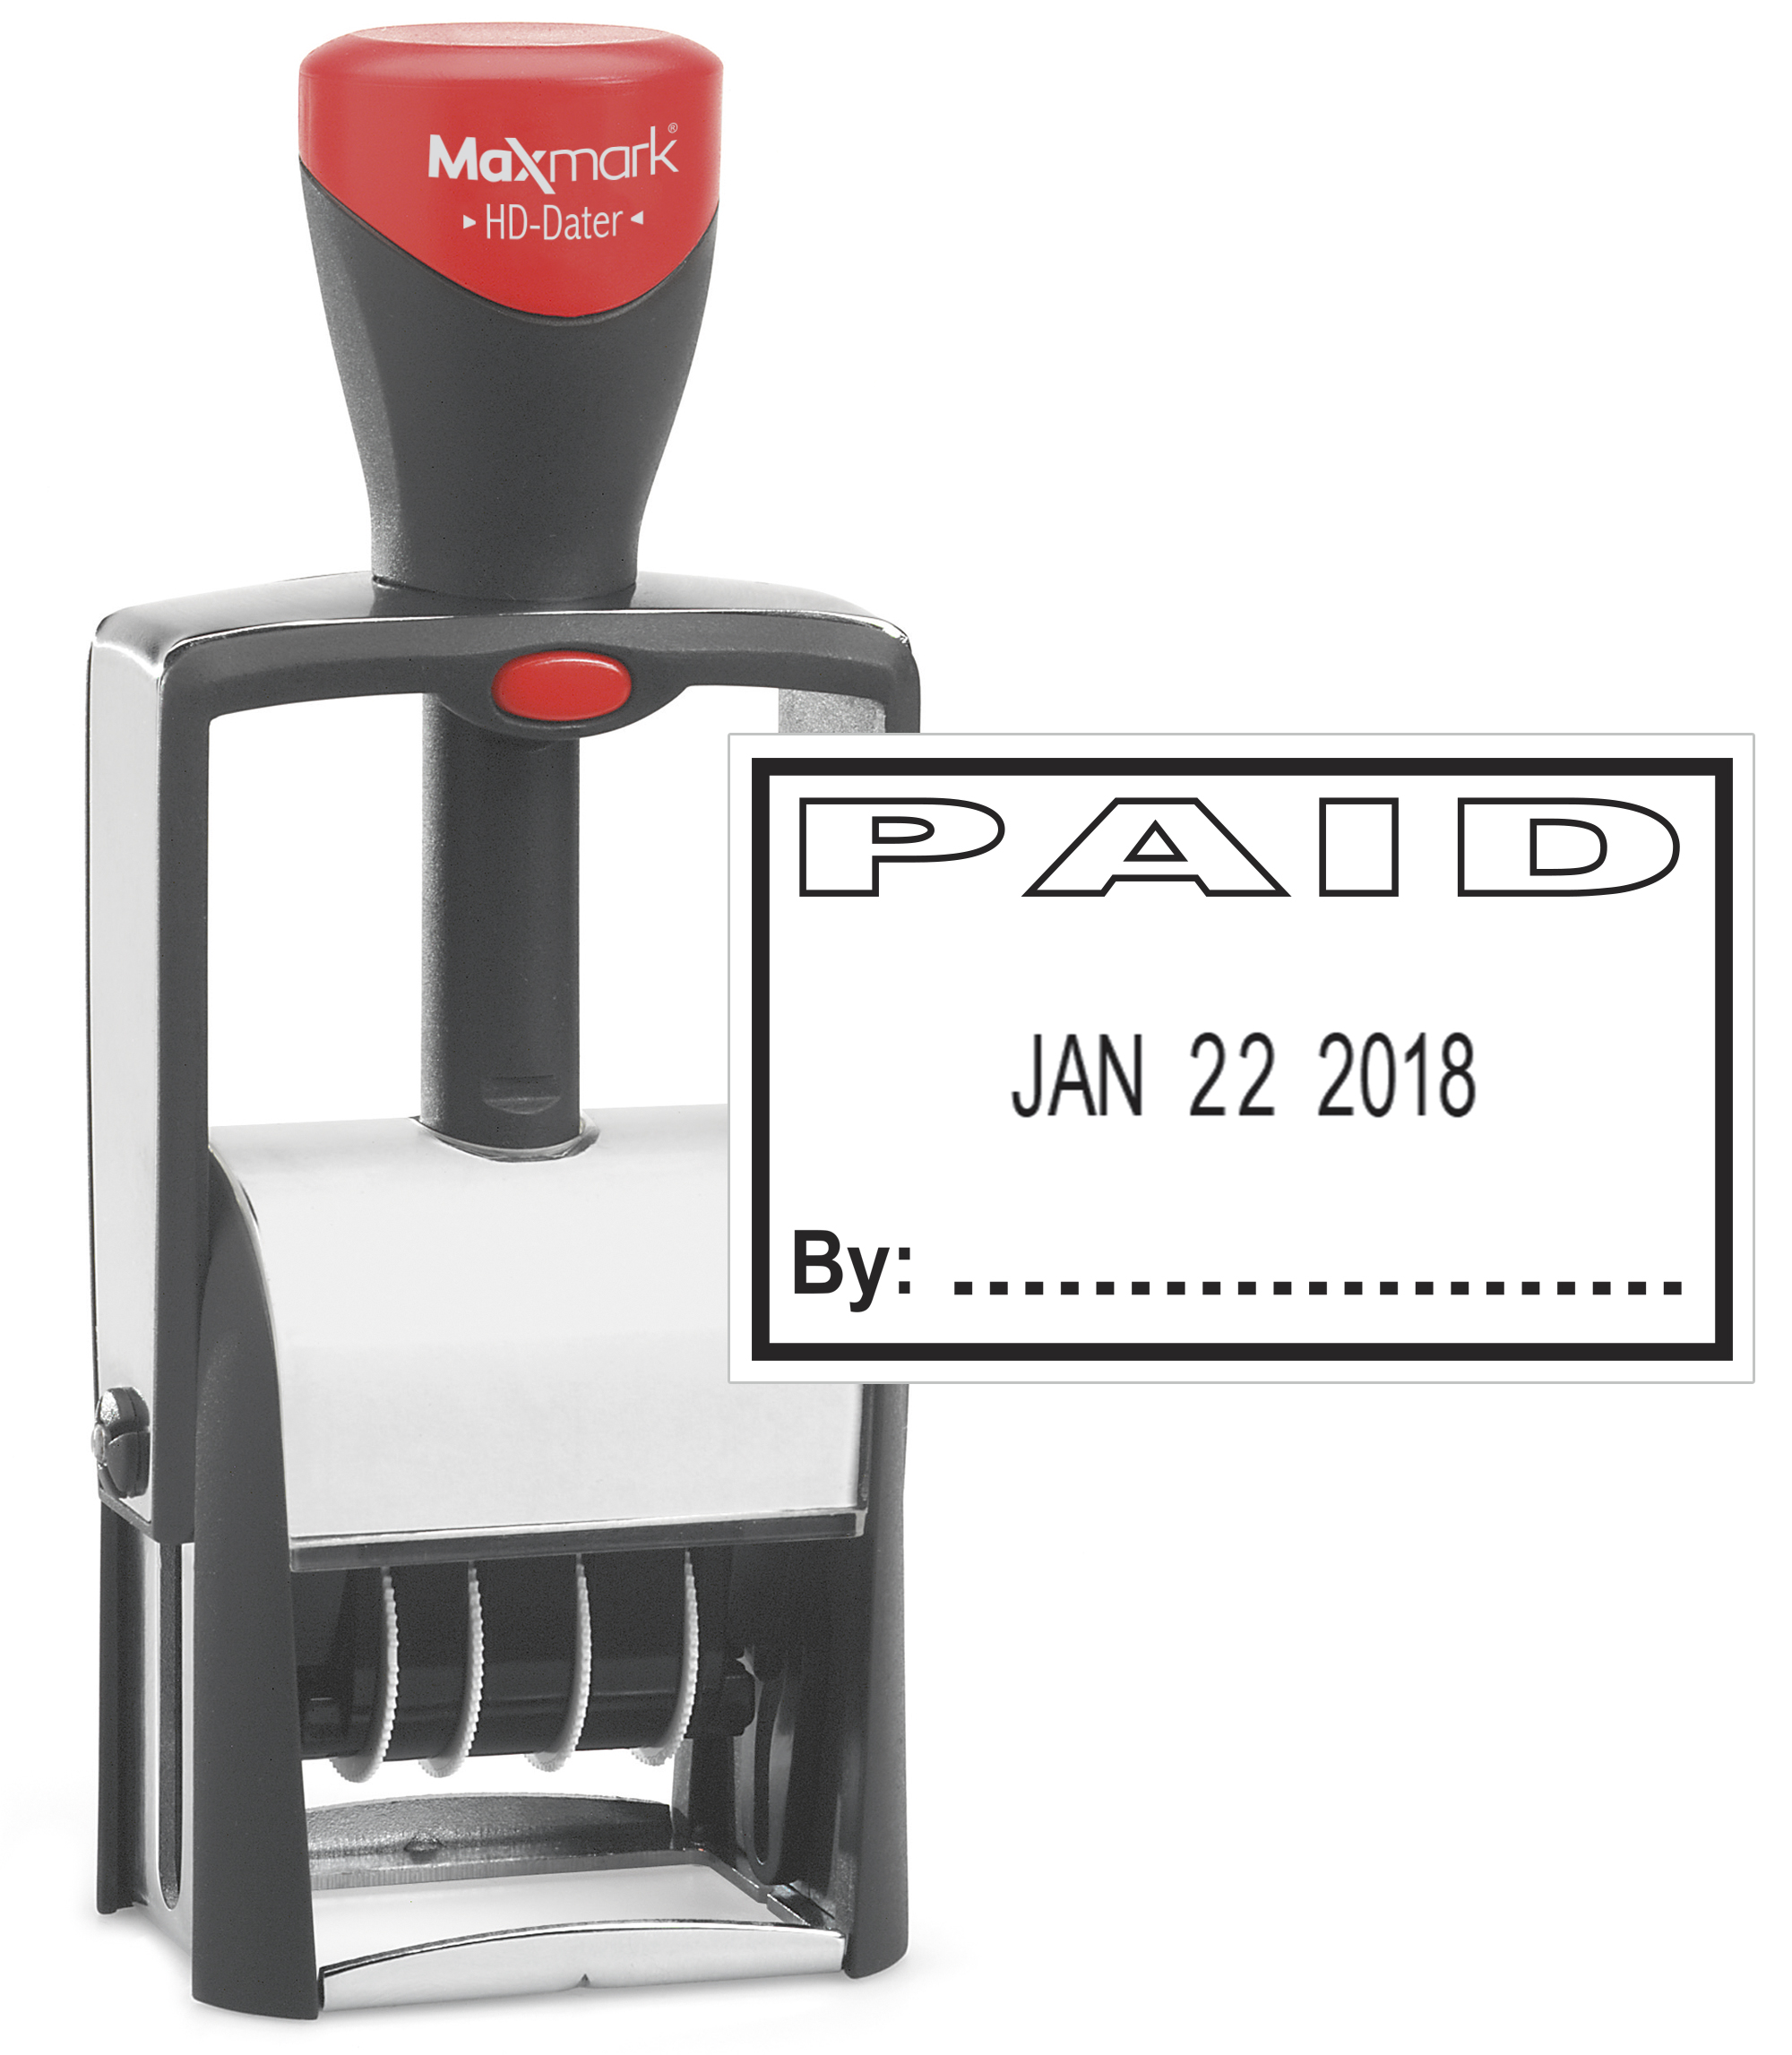 Heavy Duty Date Stamp with "PAID" Self Inking Stamp - BLACK Ink